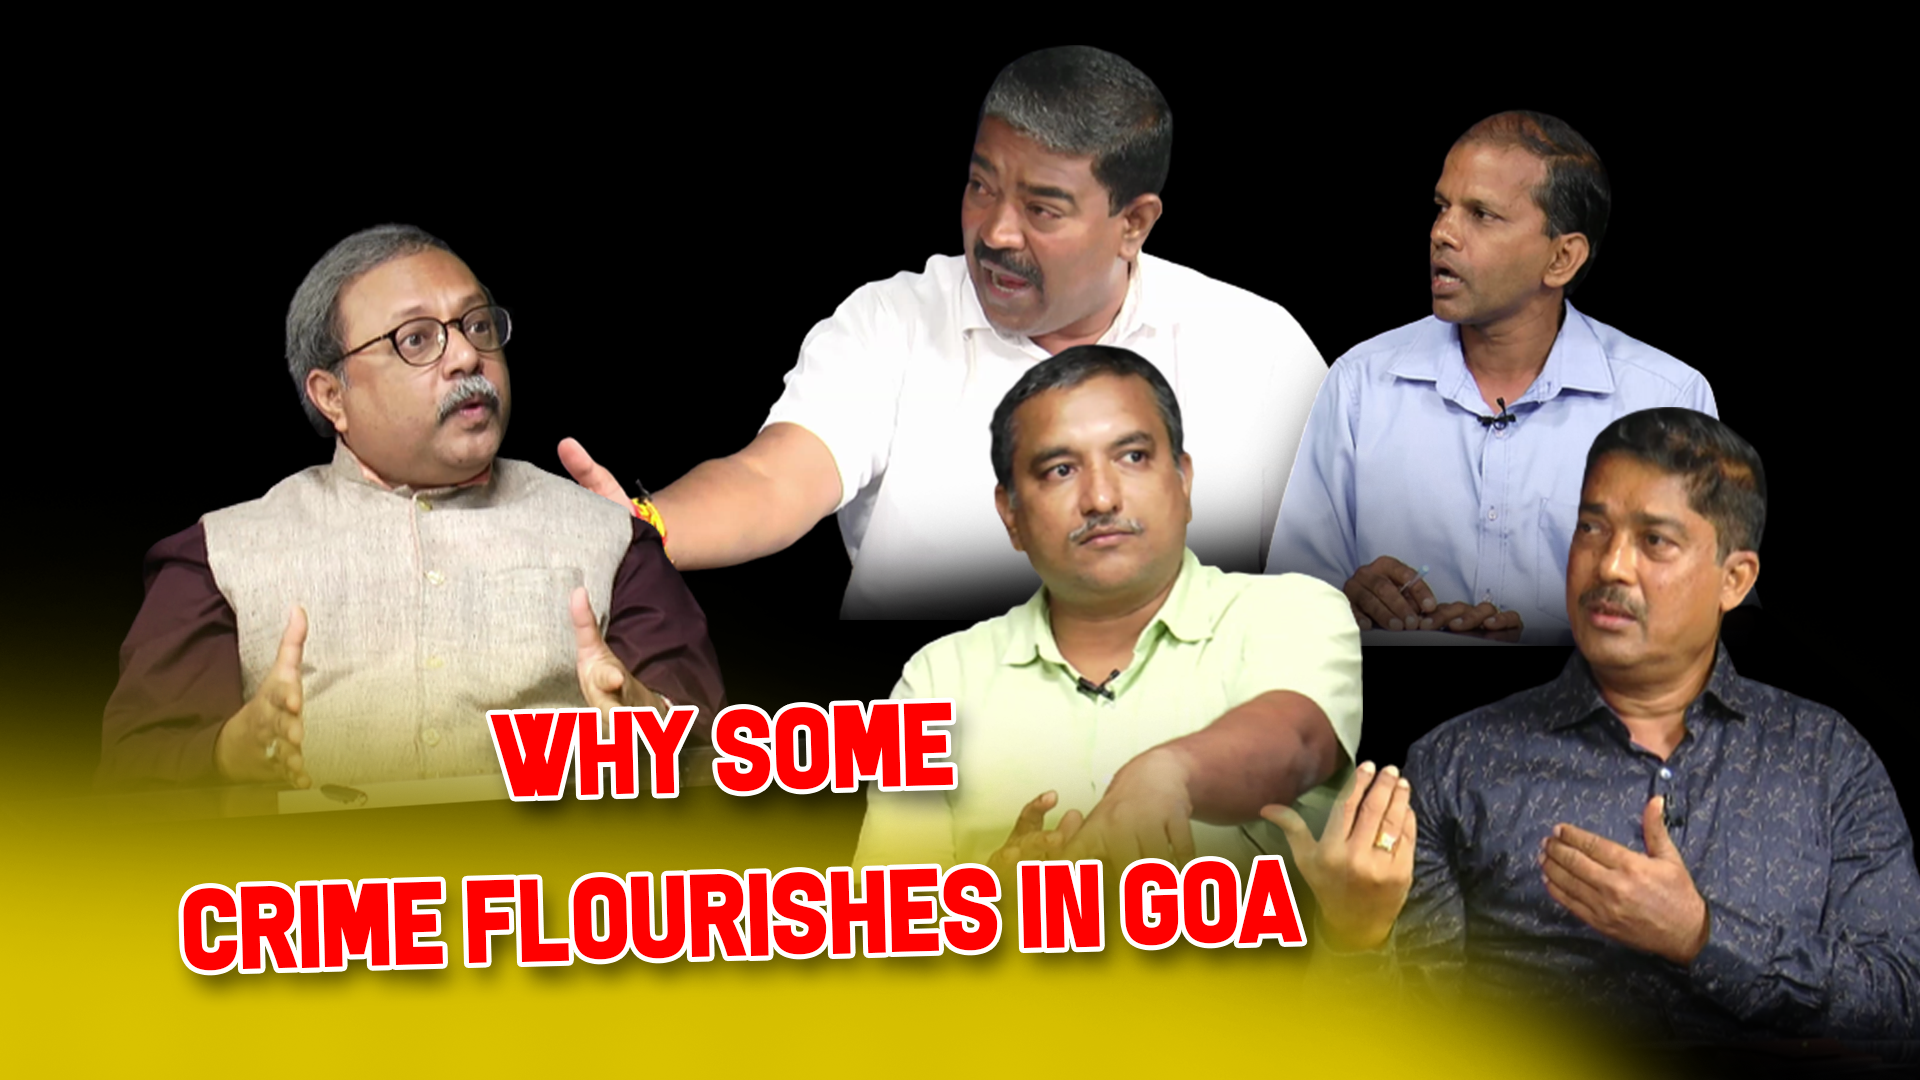 WHY SOME CRIME FLOURISHES IN GOA